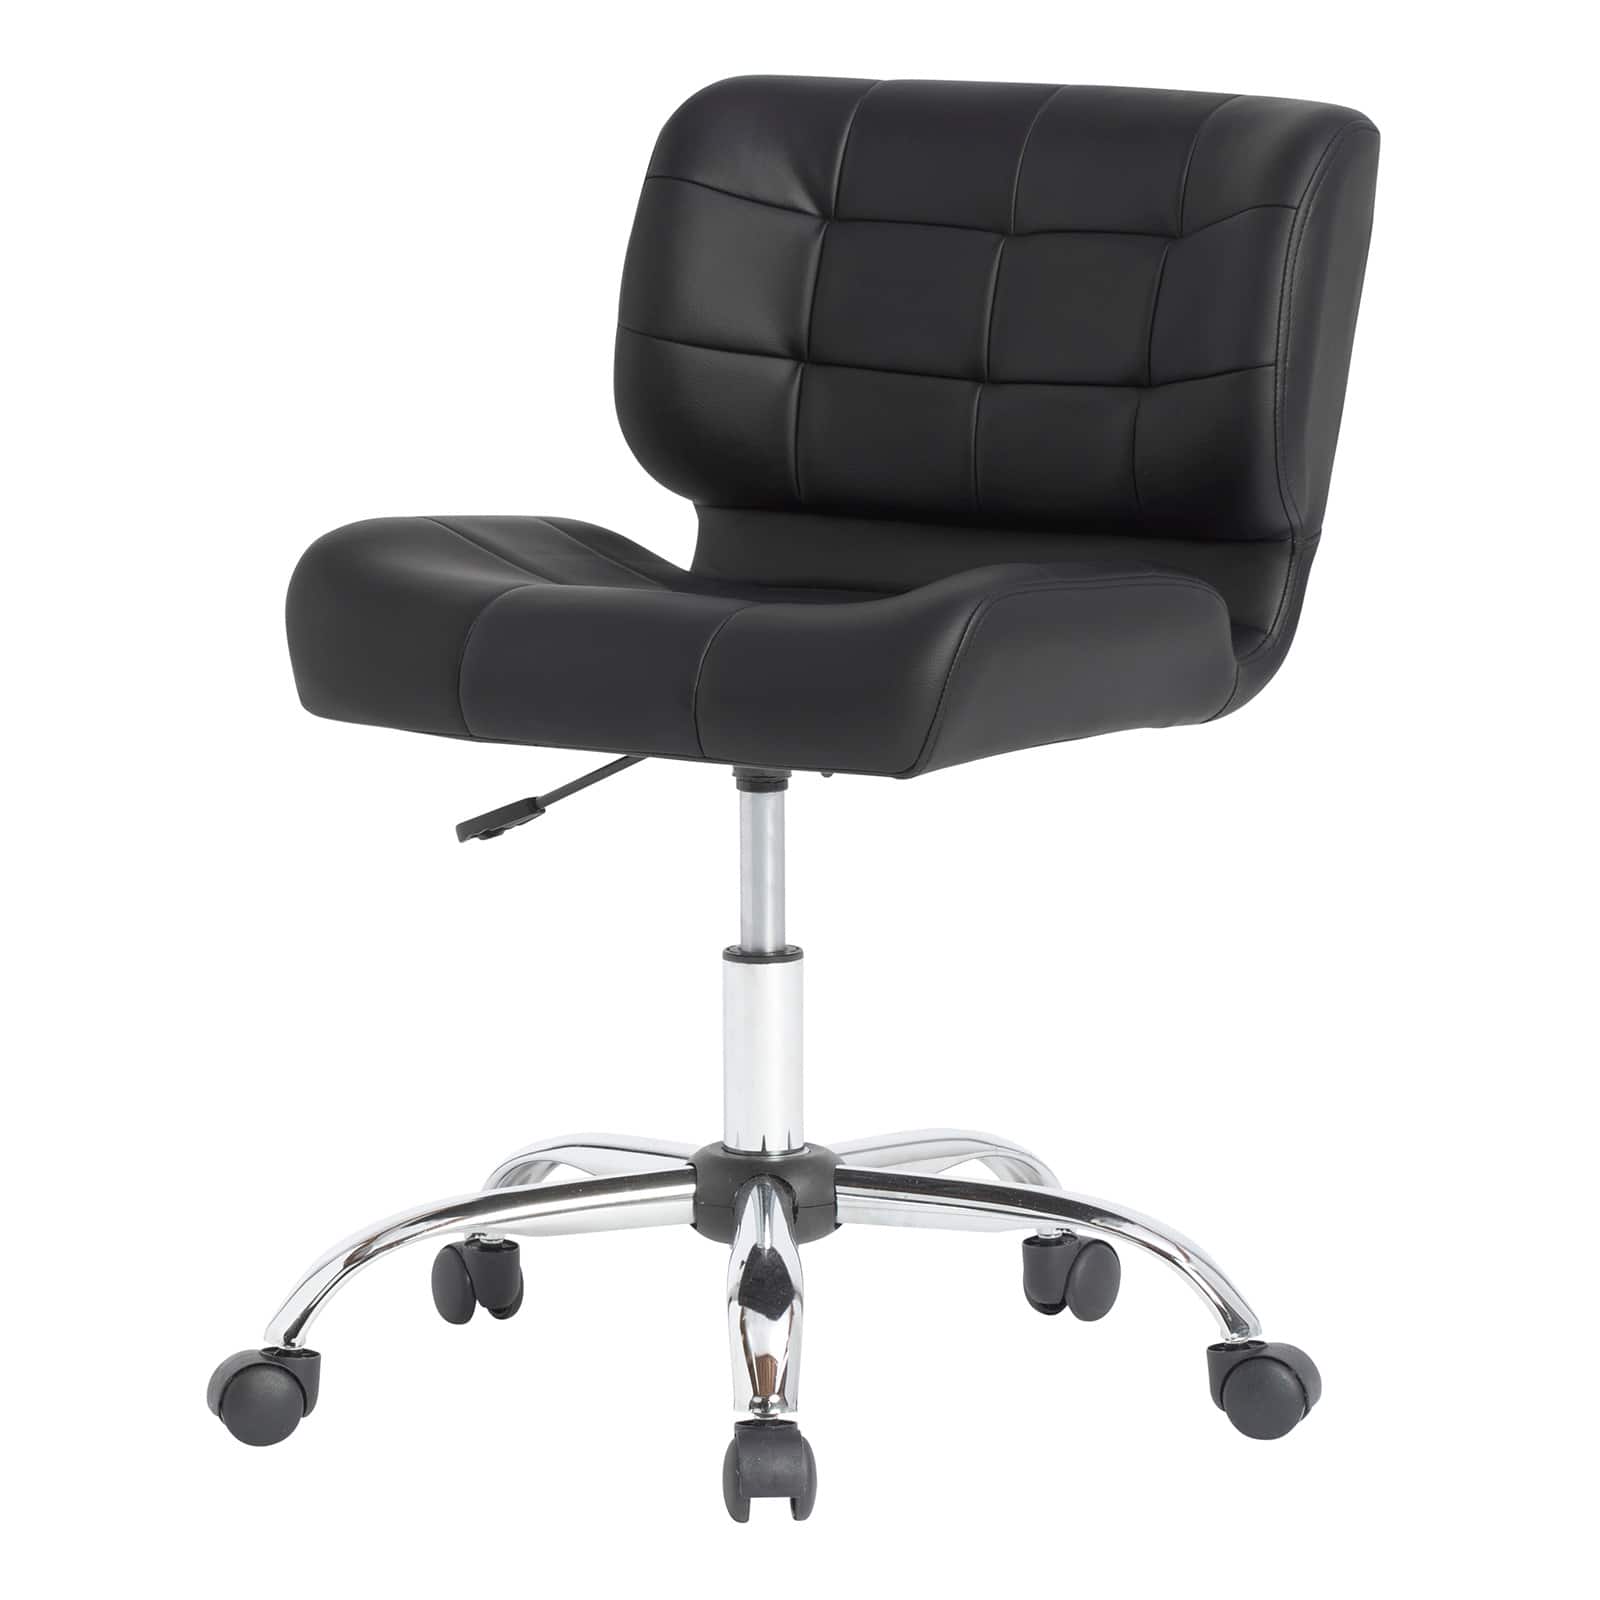 Calico Designs Crest Black Mobile Office Task Chair with Adjustable Height